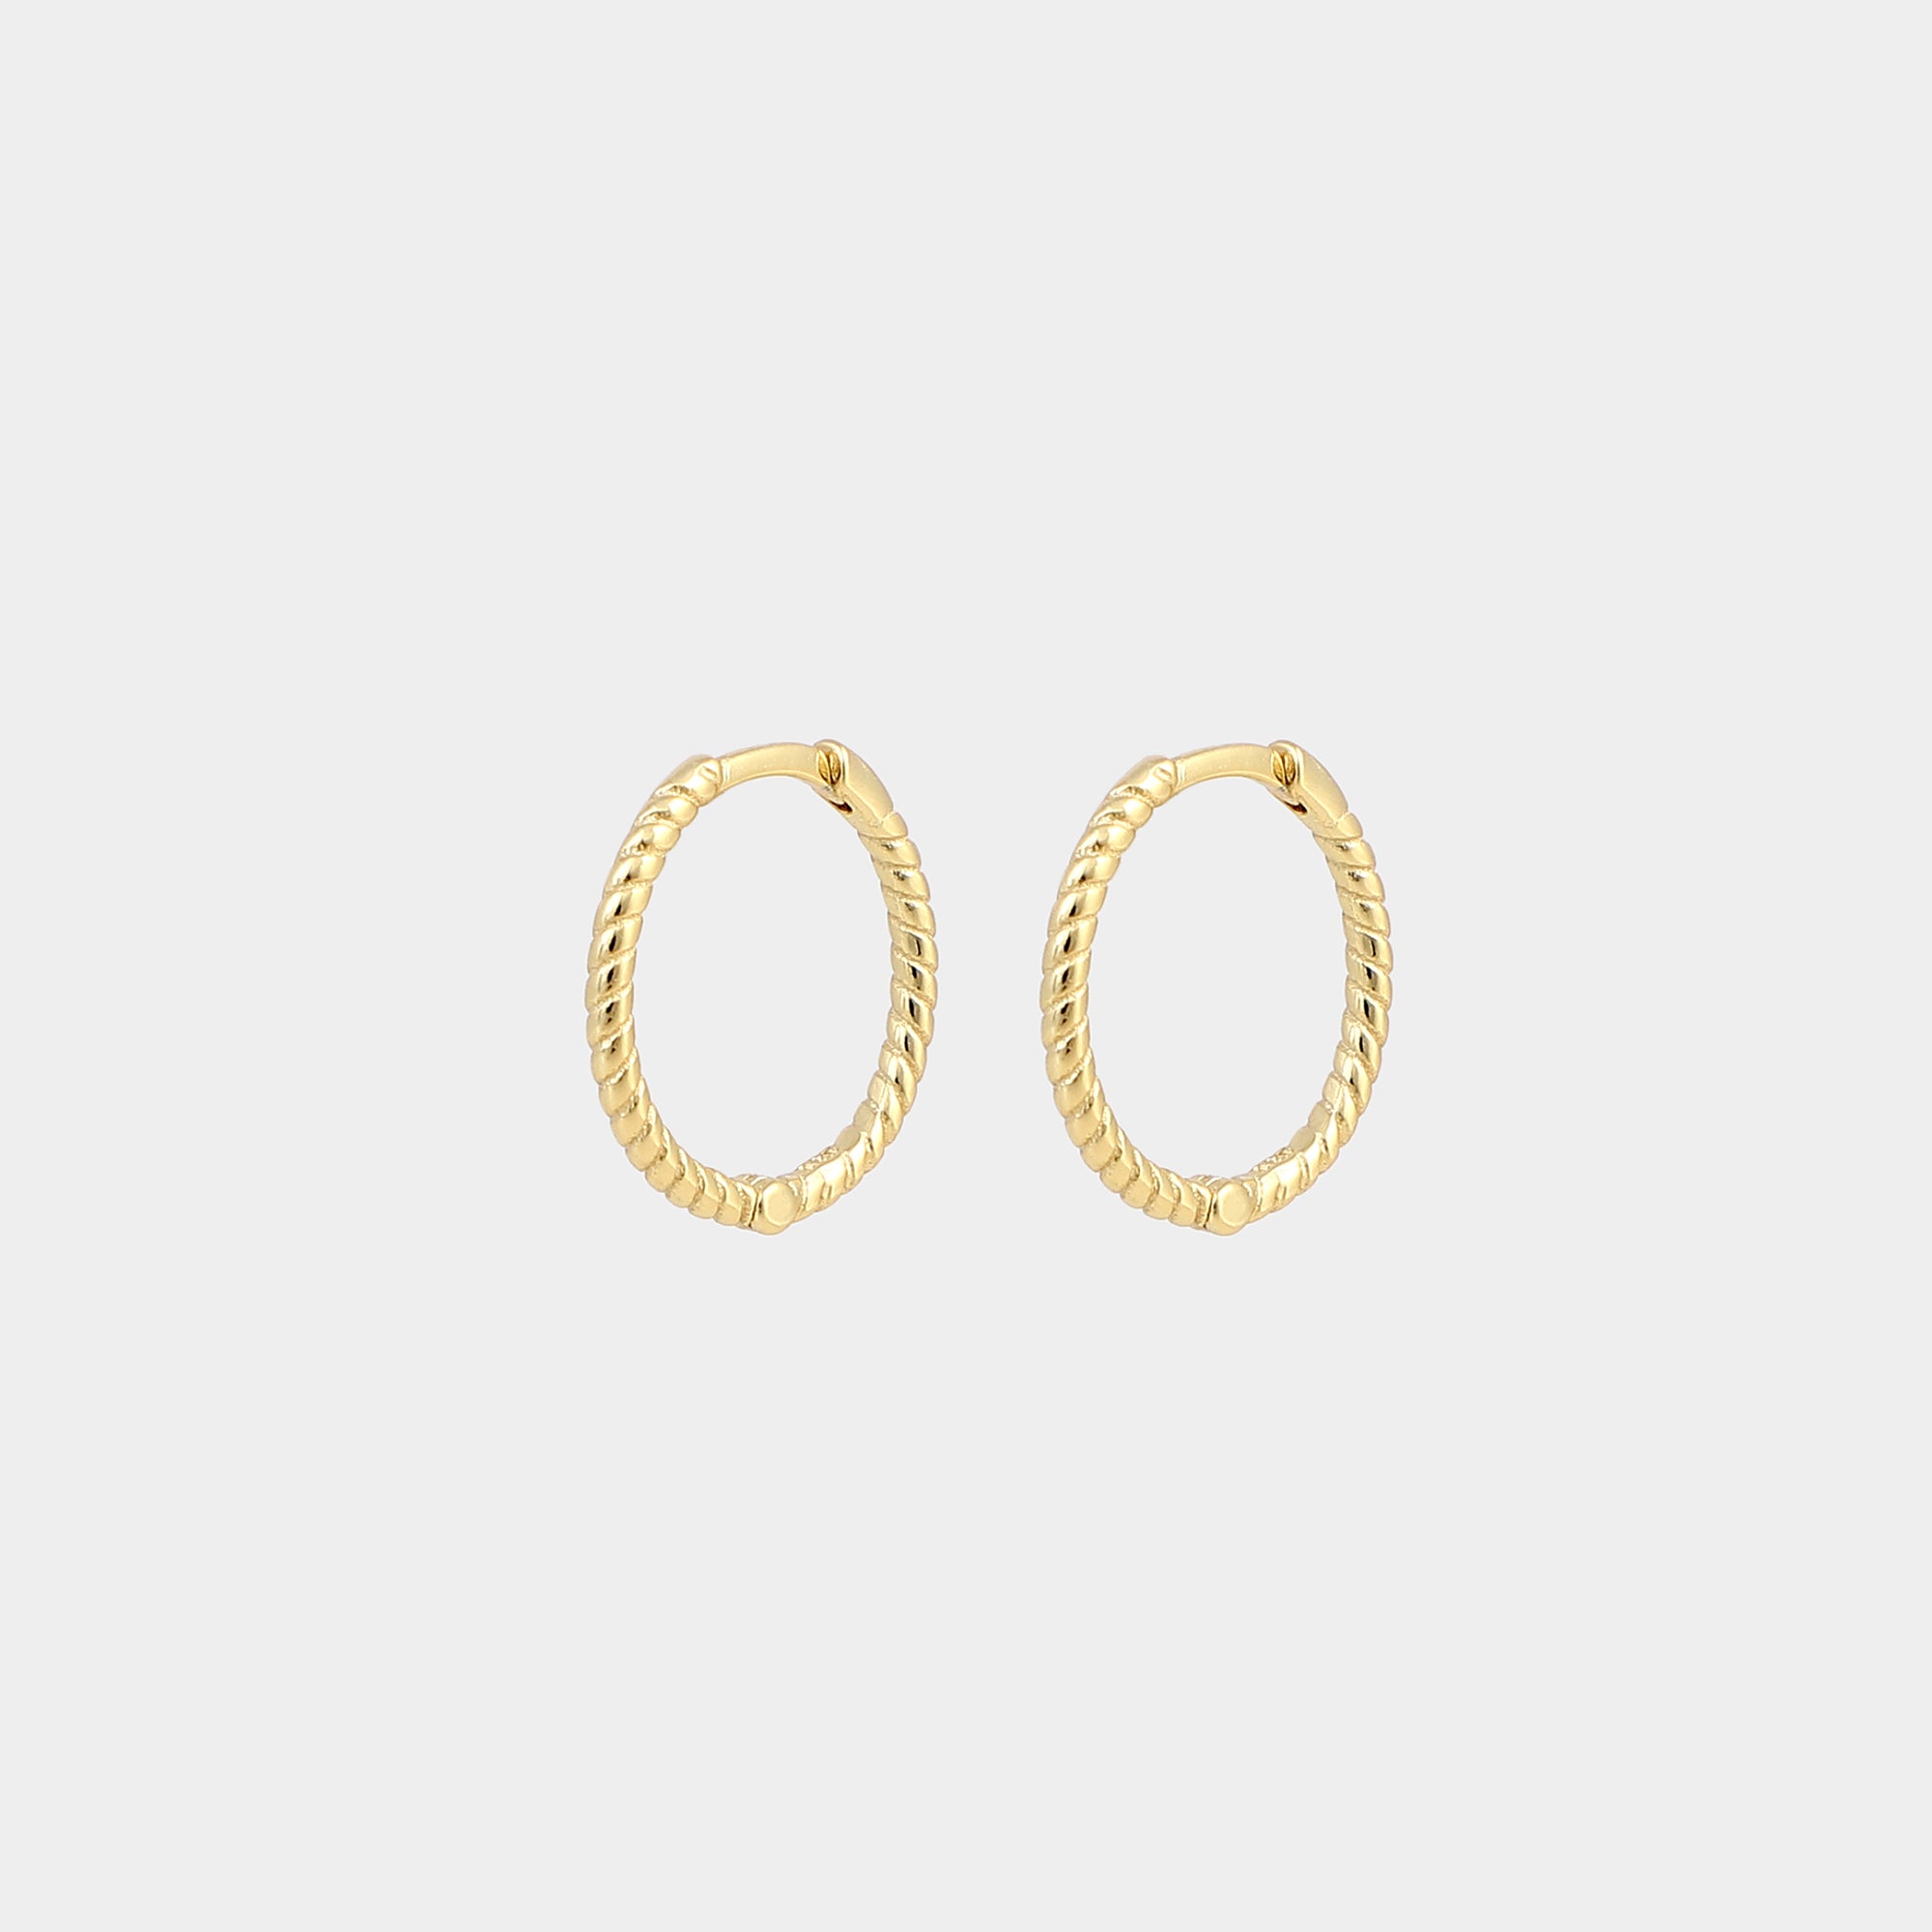 PLAIN. | 14k gold or platinum plated jewelry, custom available.